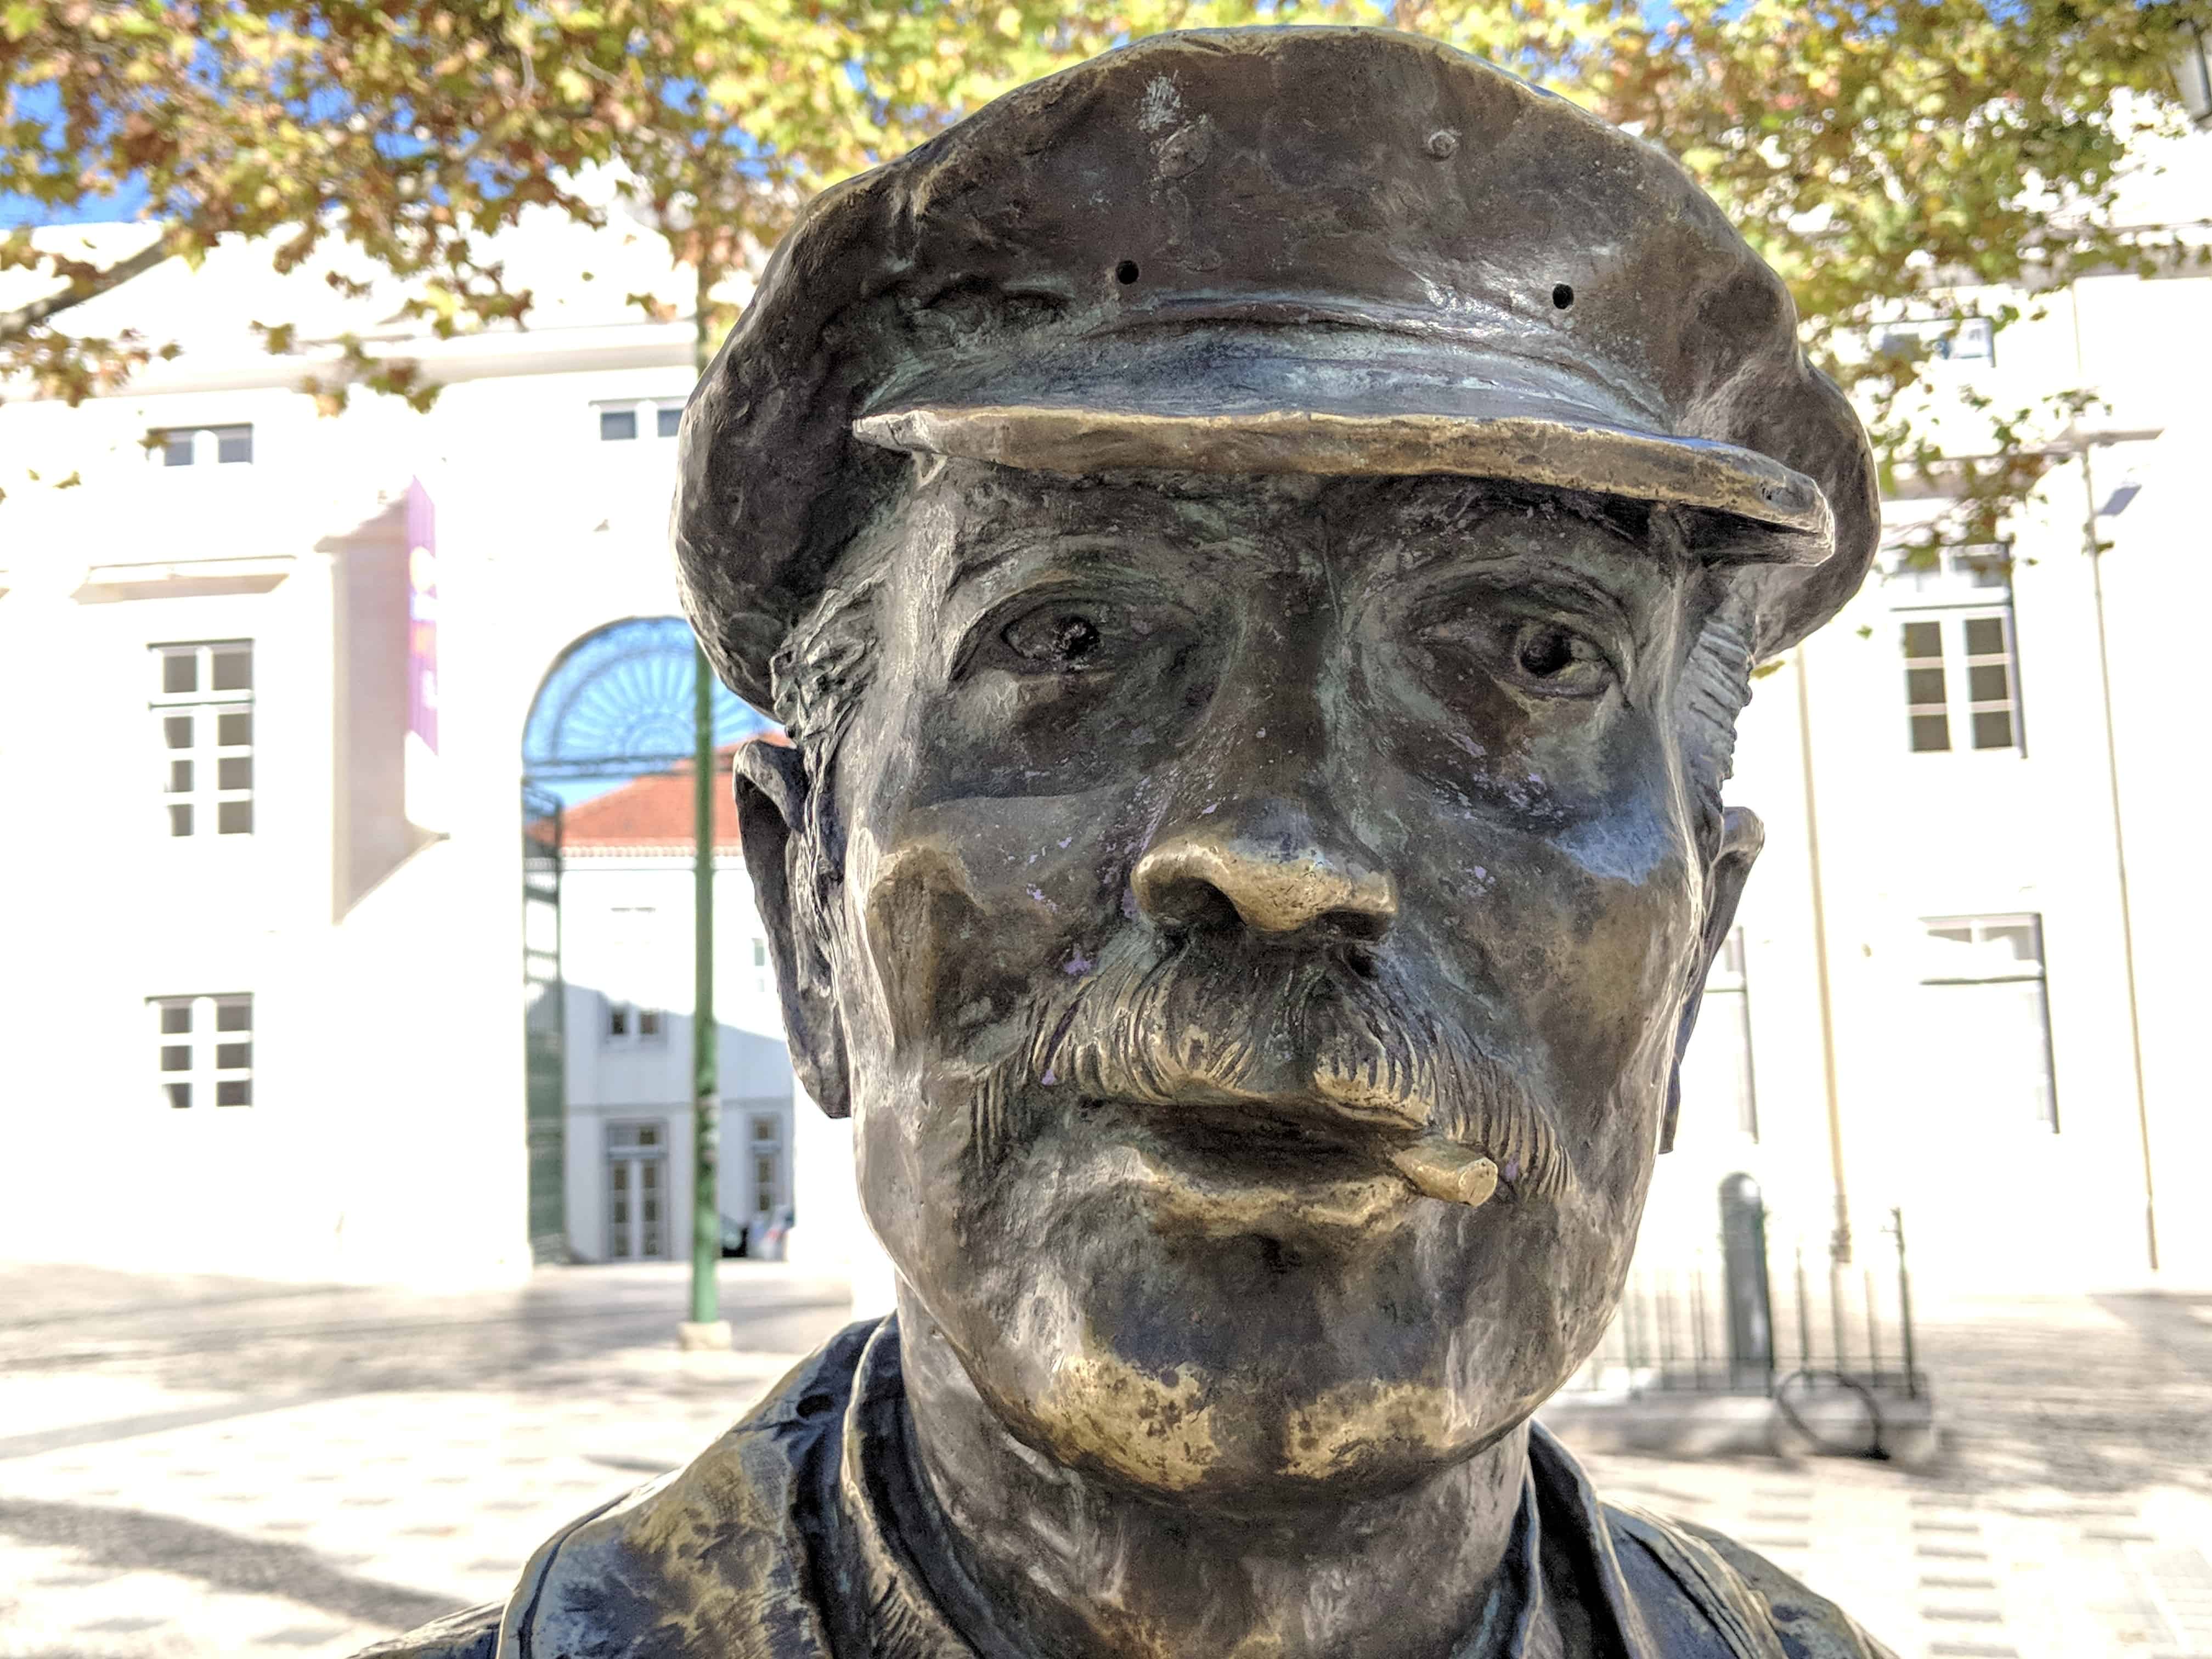 Close-up of the head of a metal statue of a man with a moustache and cap, with white buildings visible behind. 